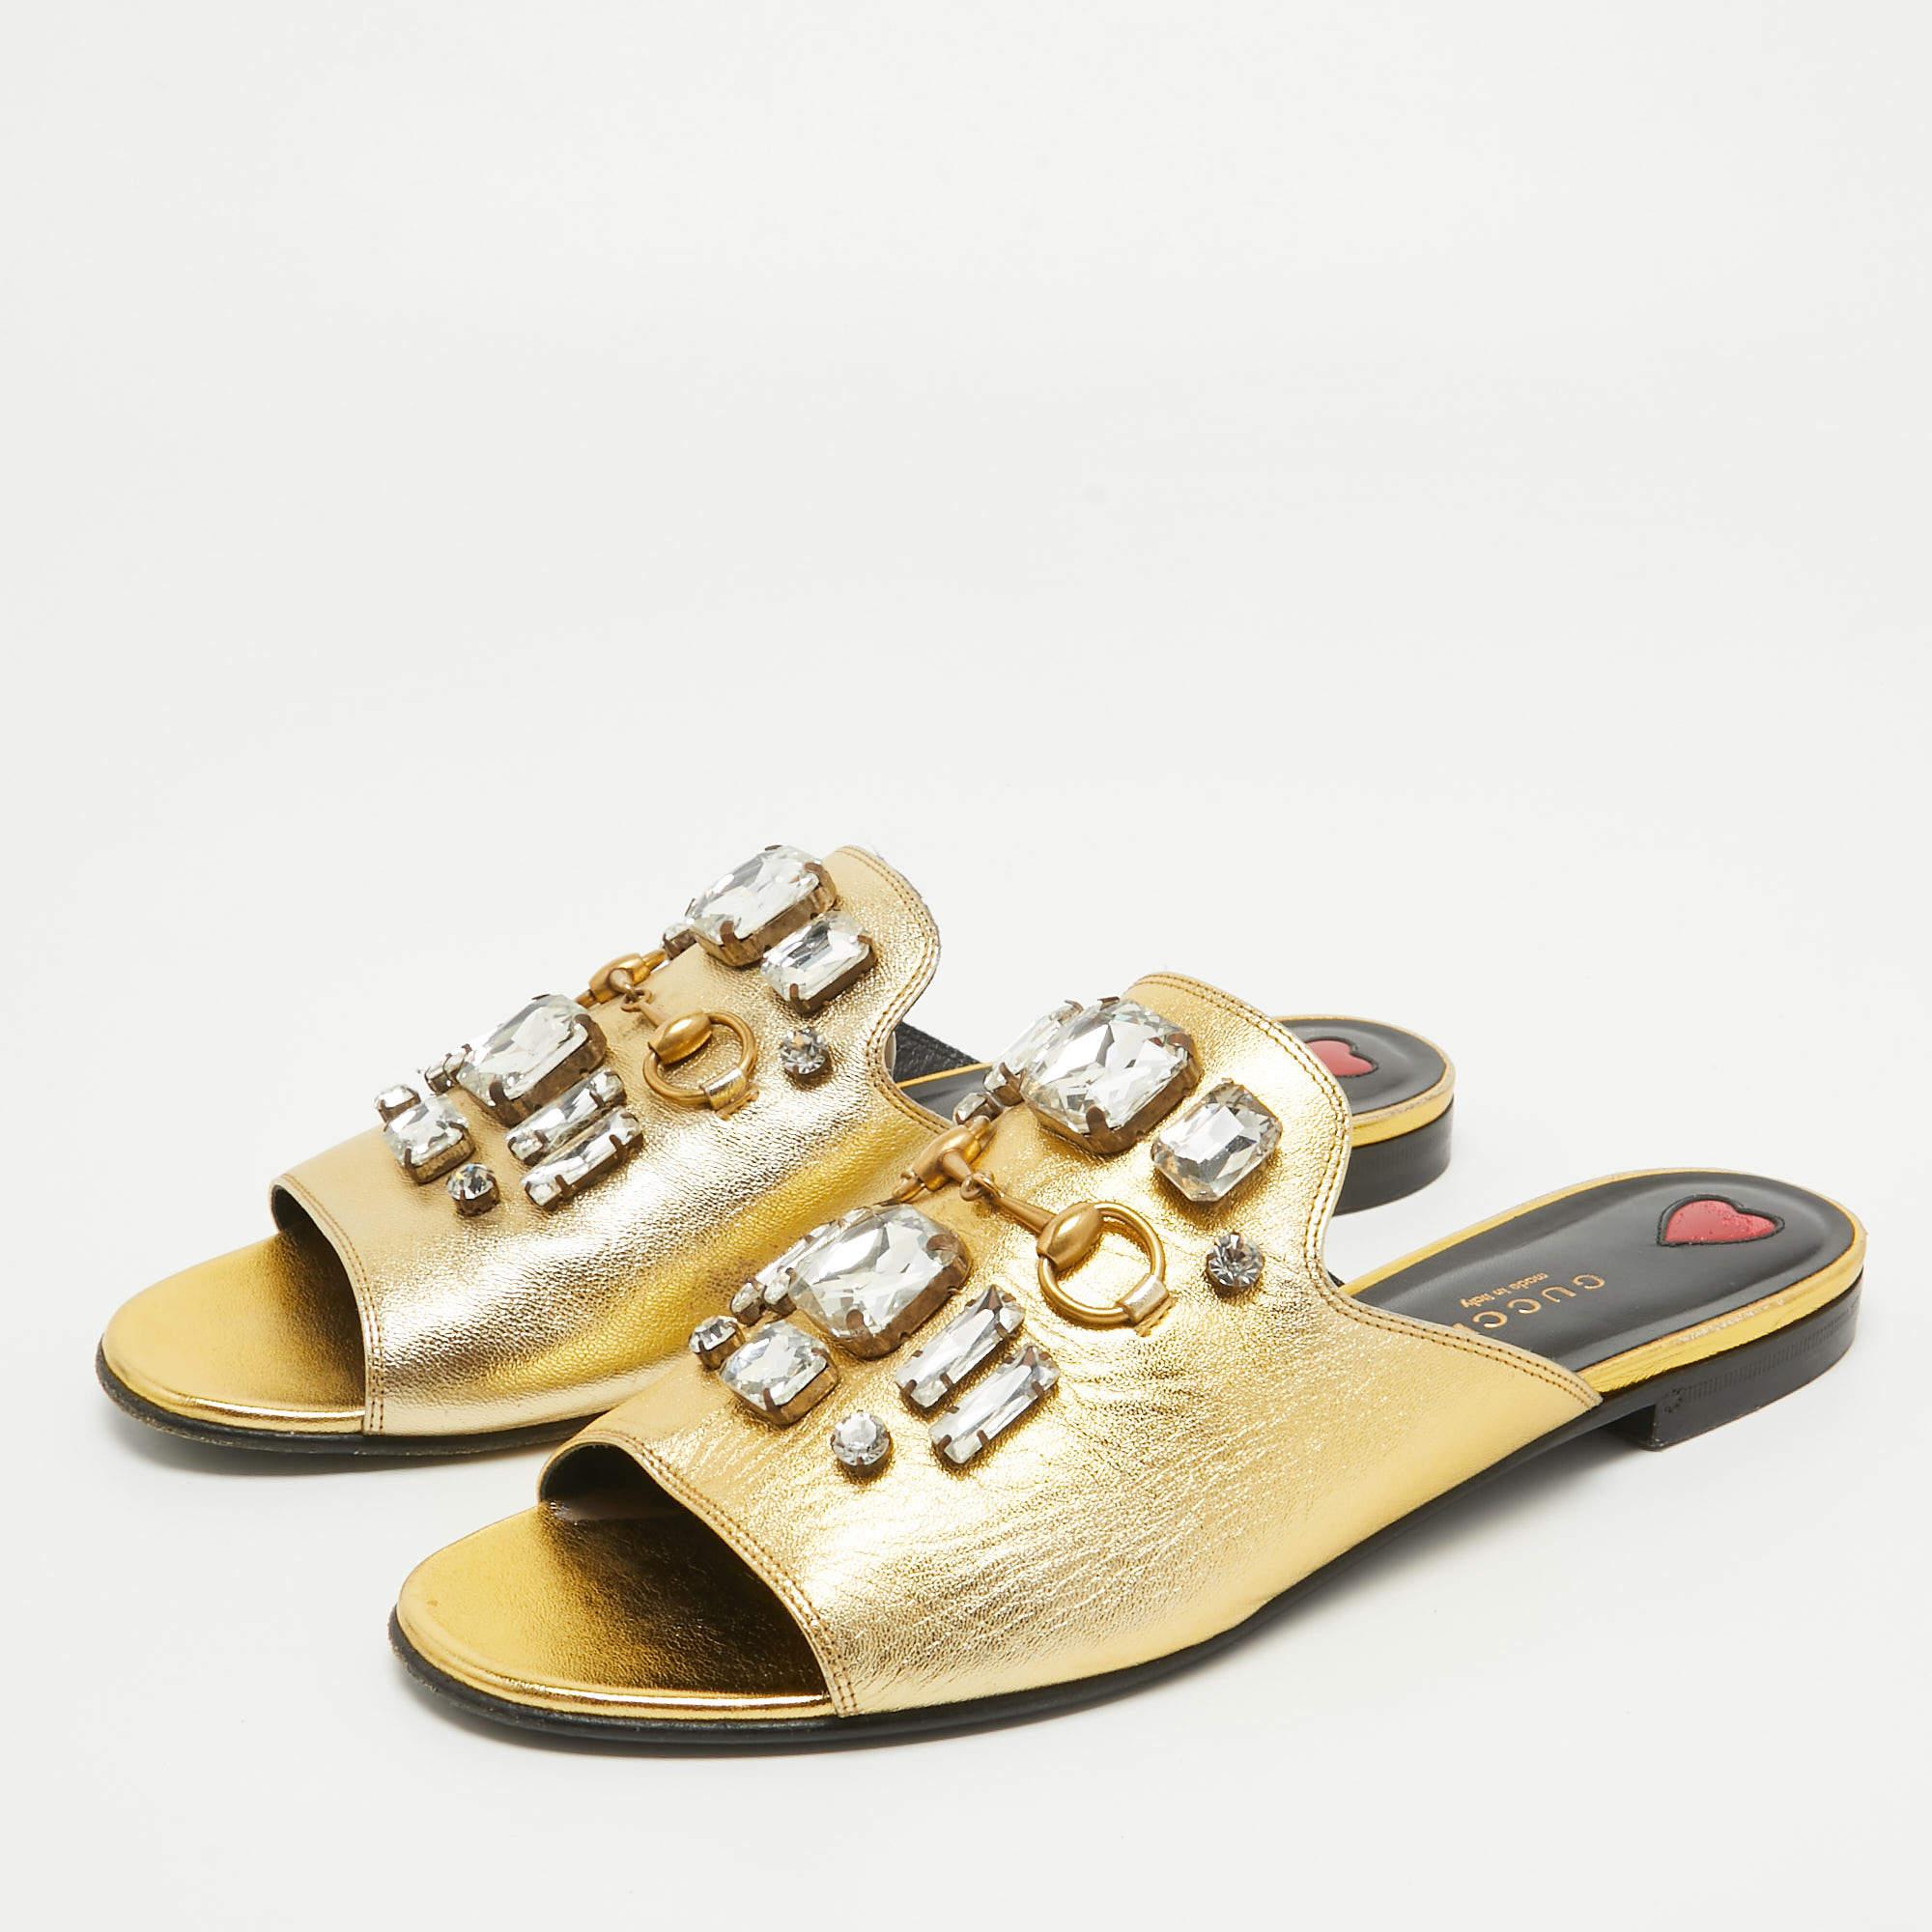 Frame your feet with these Gucci gold flat slides. Created using the best materials, the flats are perfect with short, midi, and maxi hemlines.

